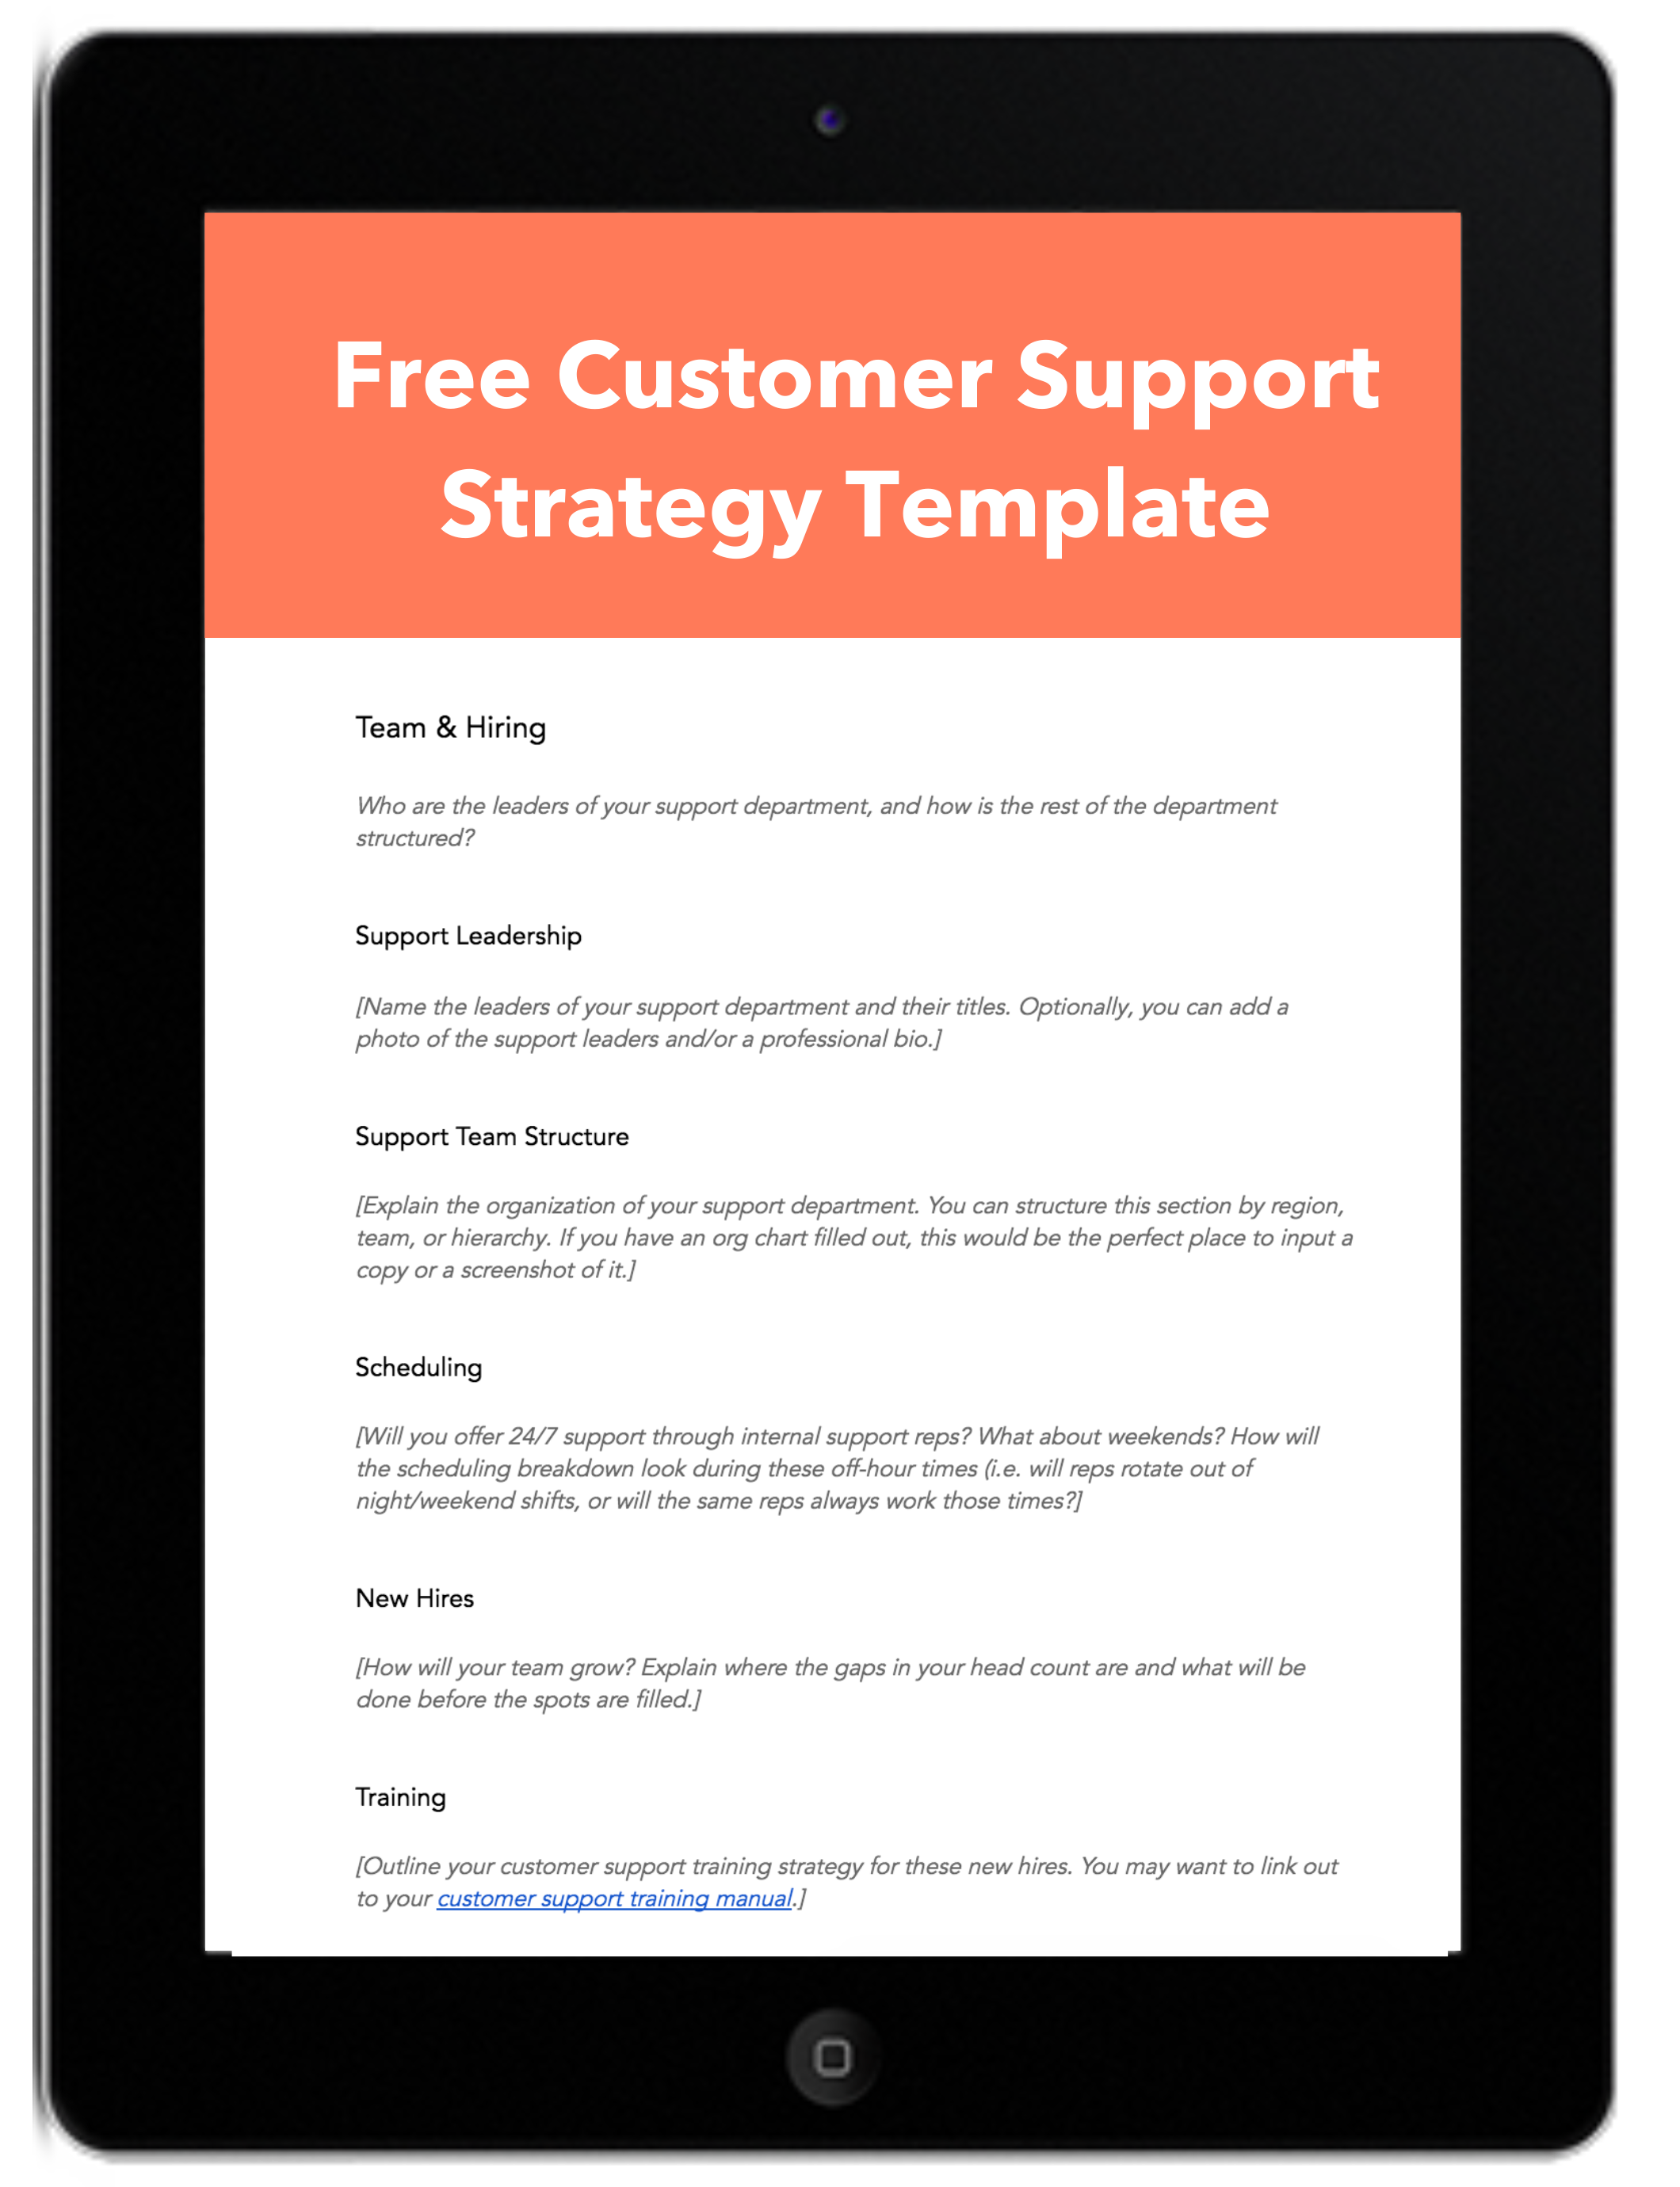 business plan for customer service department